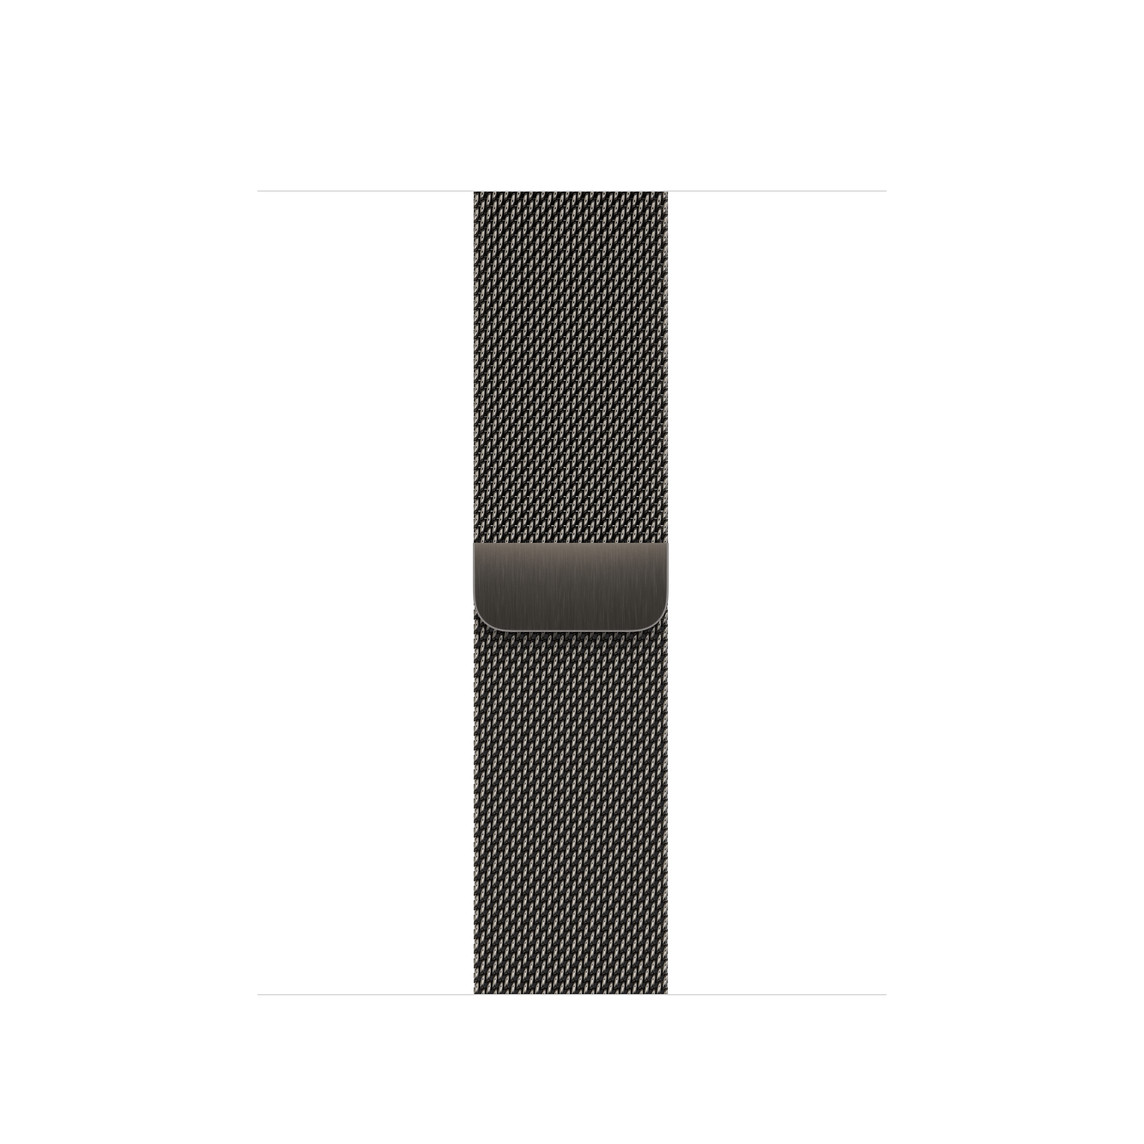 Graphite (dark grey) Milanese Loop strap, polished stainless steel mesh with magnetic closure